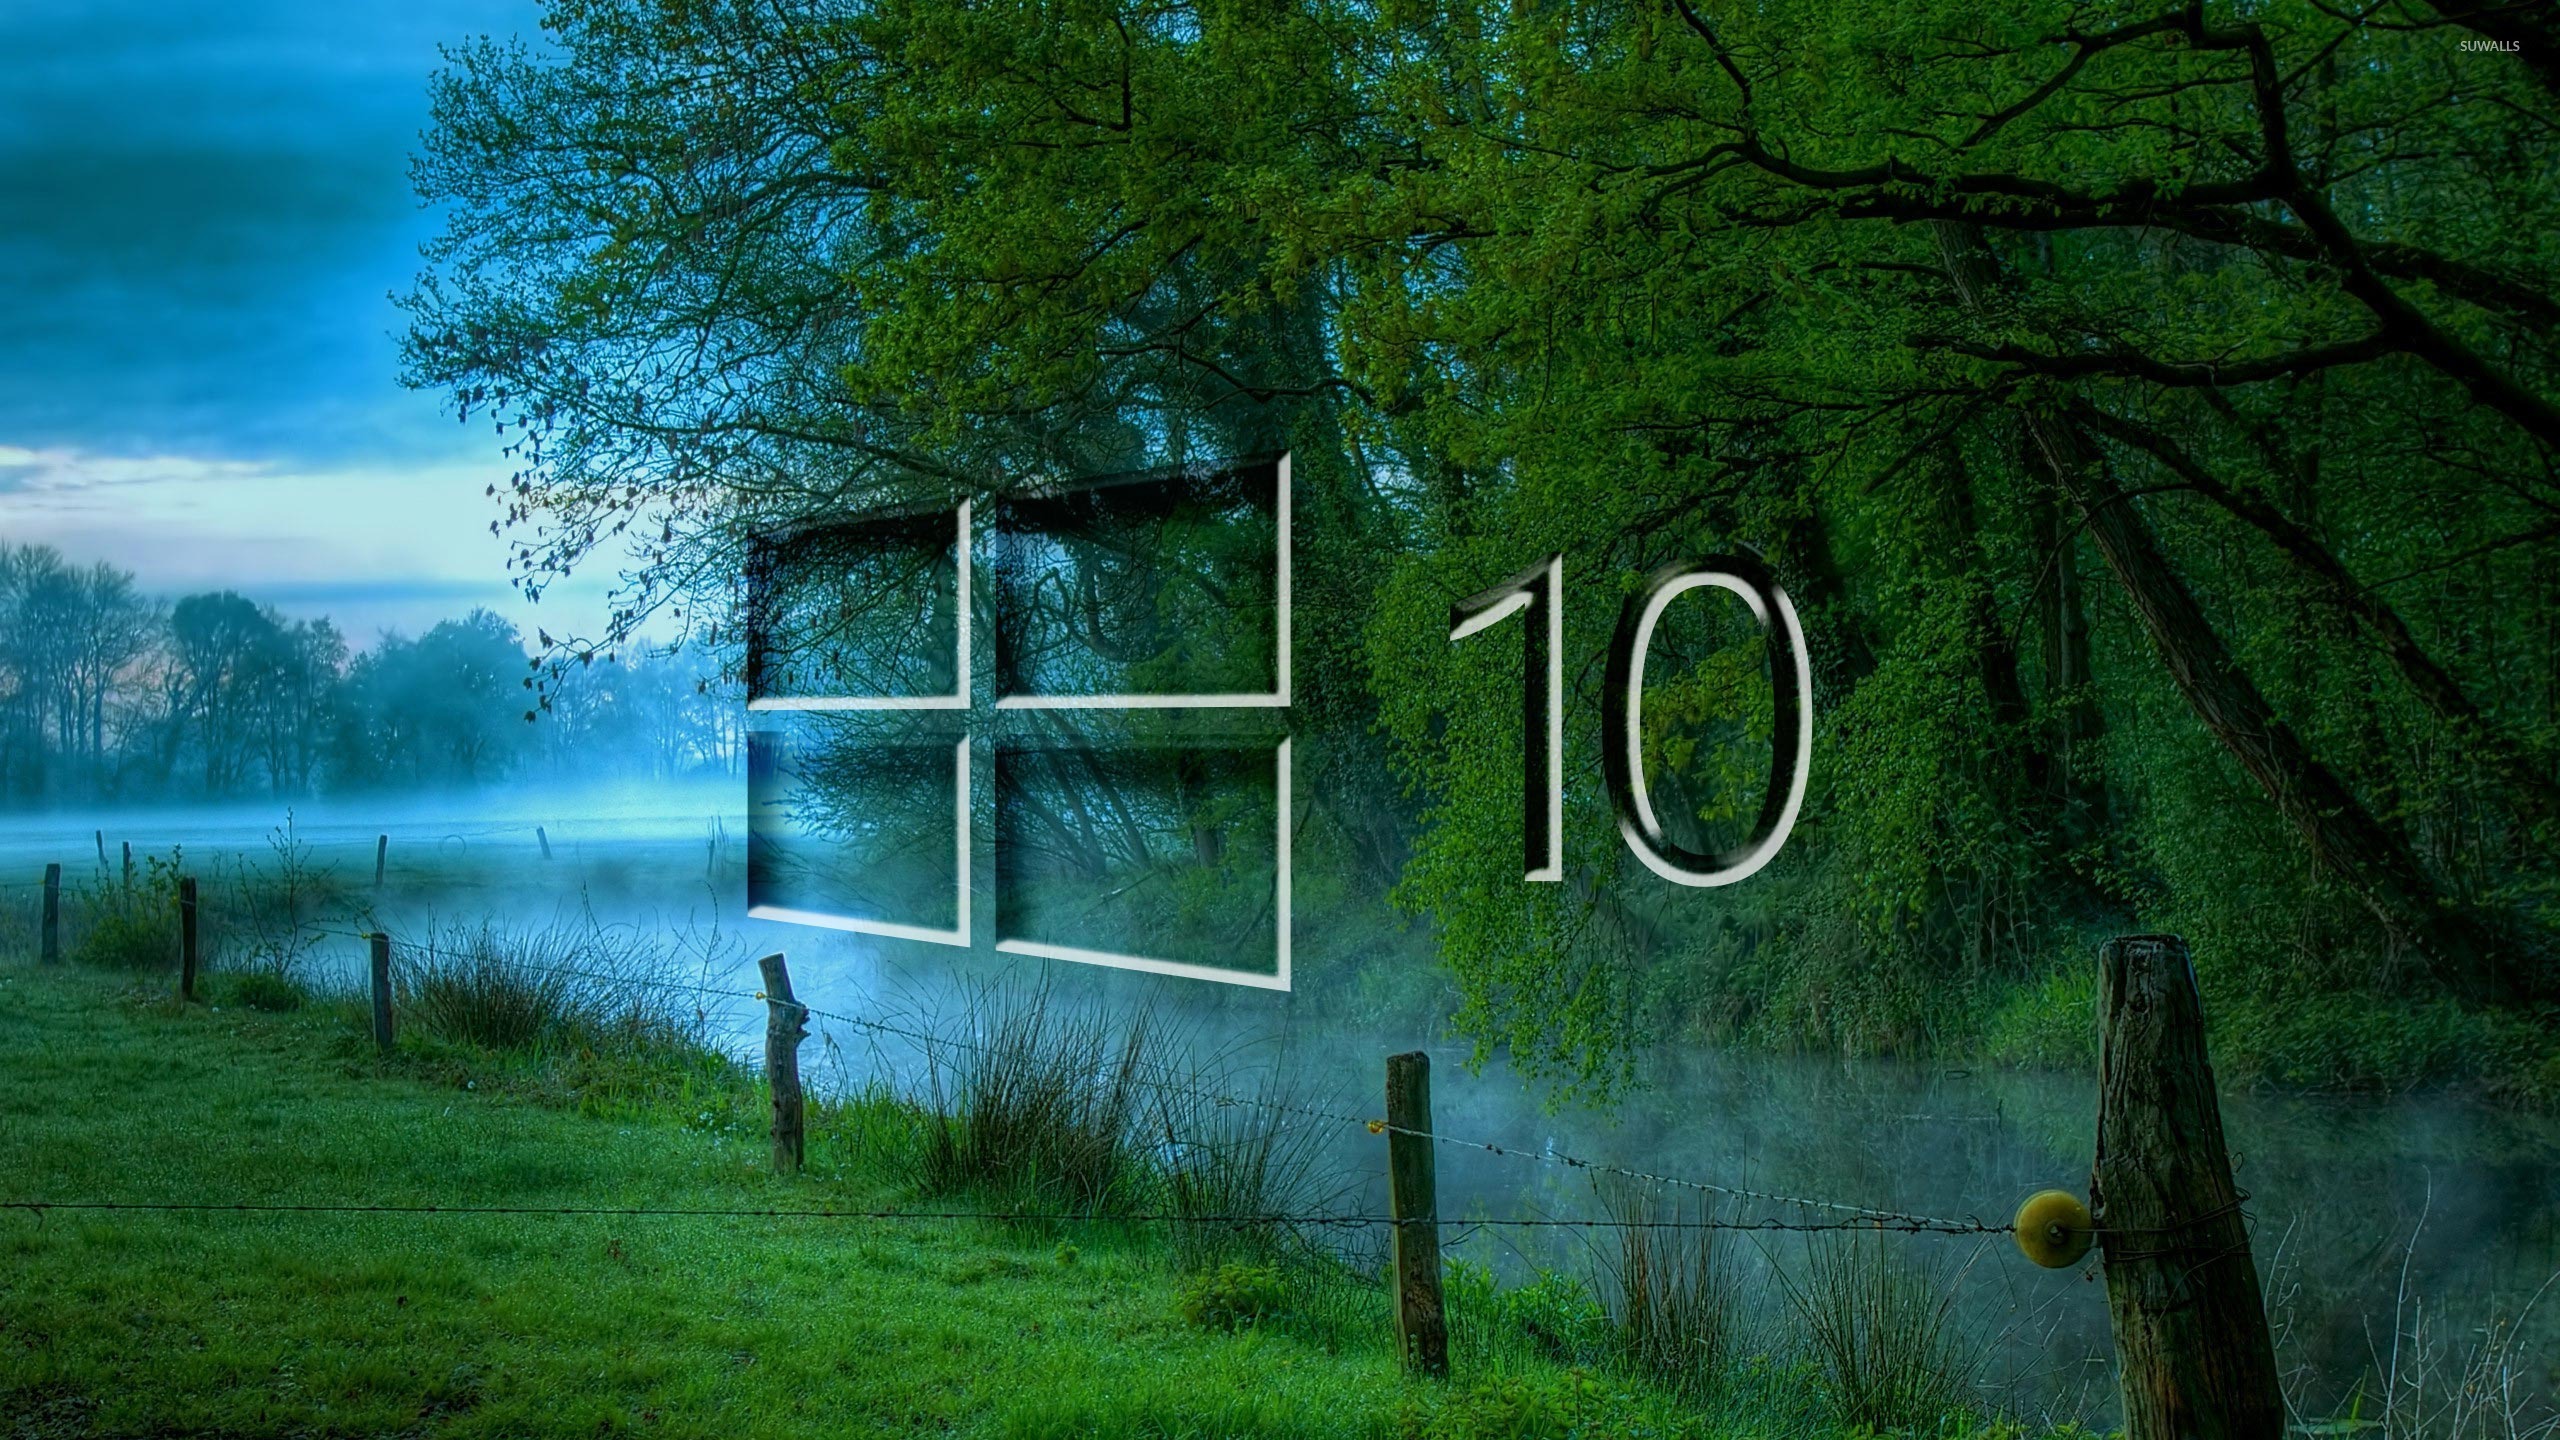 Windows 10 in the misty morning glass logo wallpaper - Computer